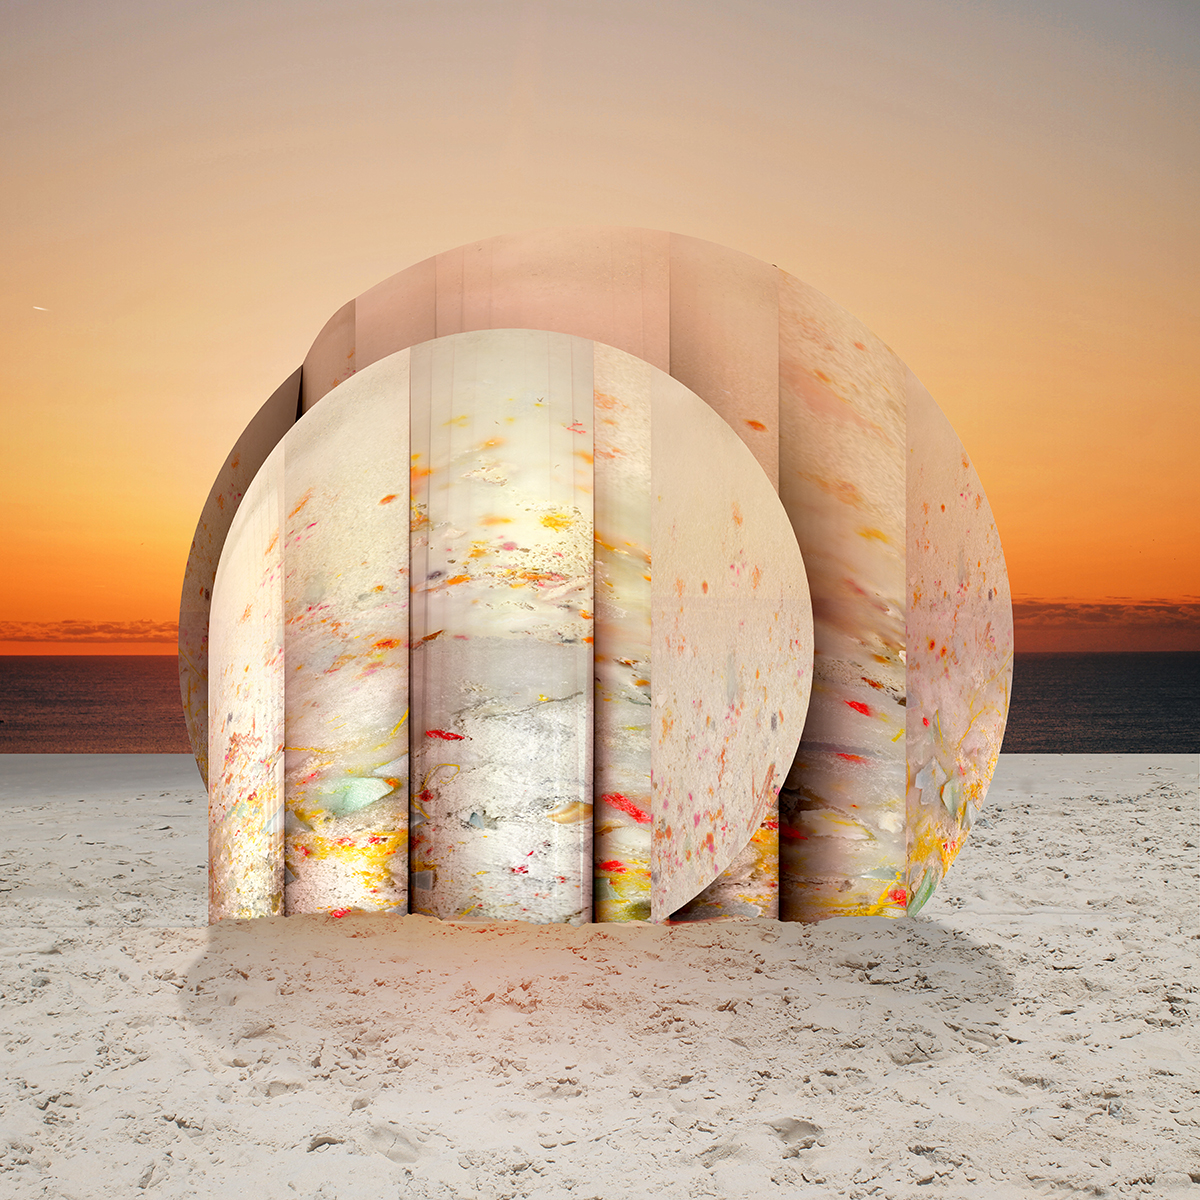 Rendering of a plastic rock on the beach